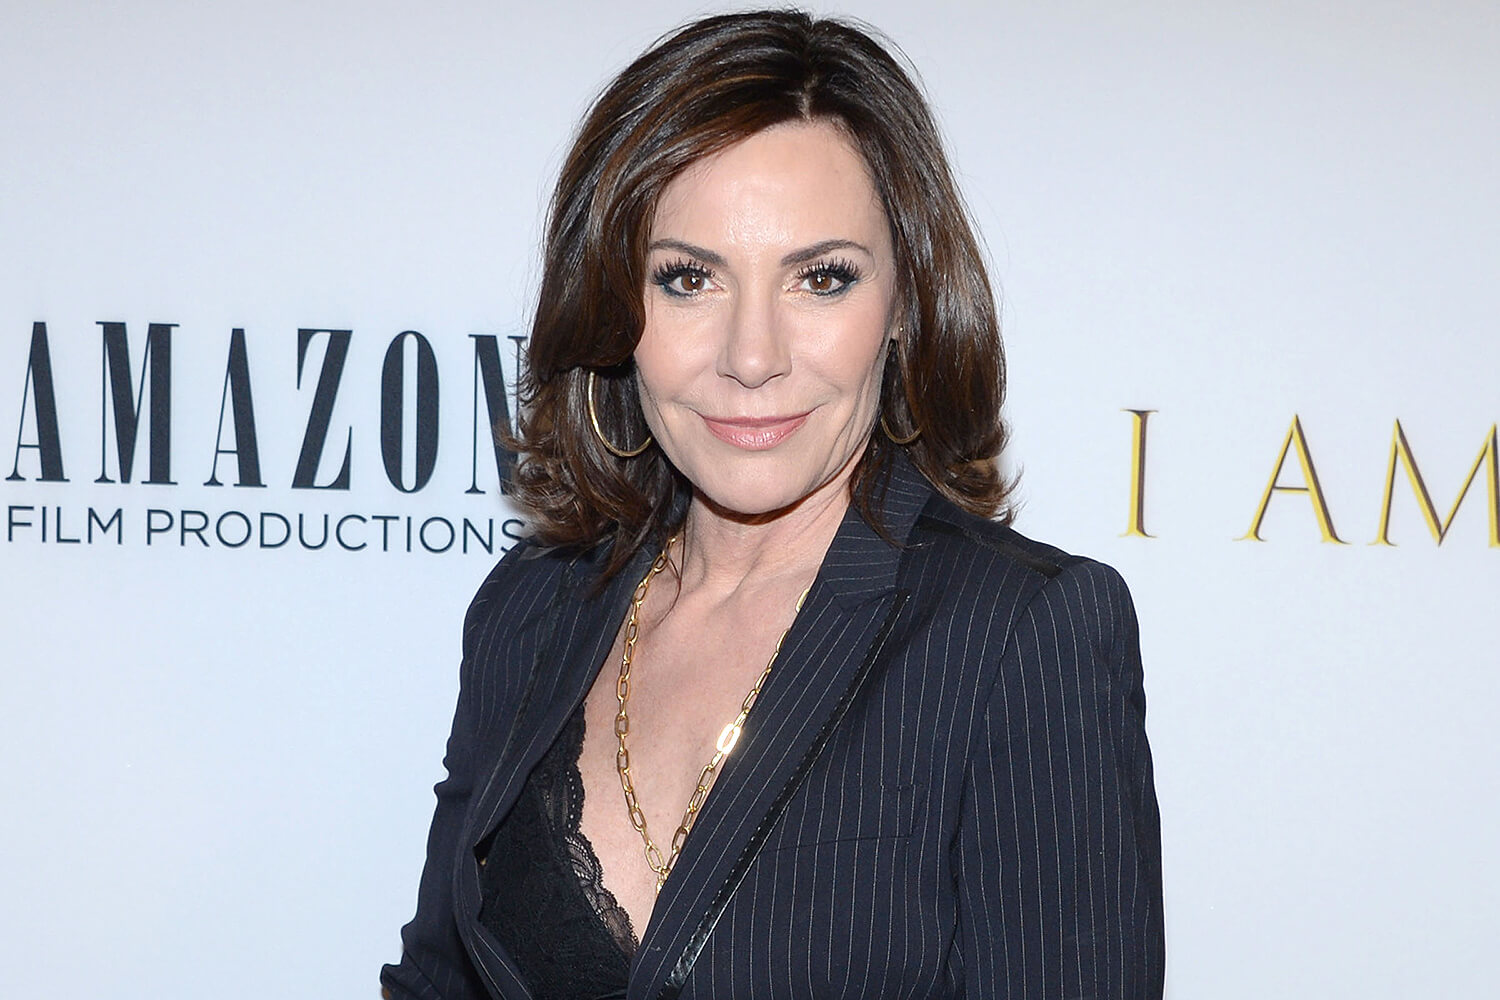 Luann de Lesseps Admits Staying Sober Is A ‘Daily Struggle’